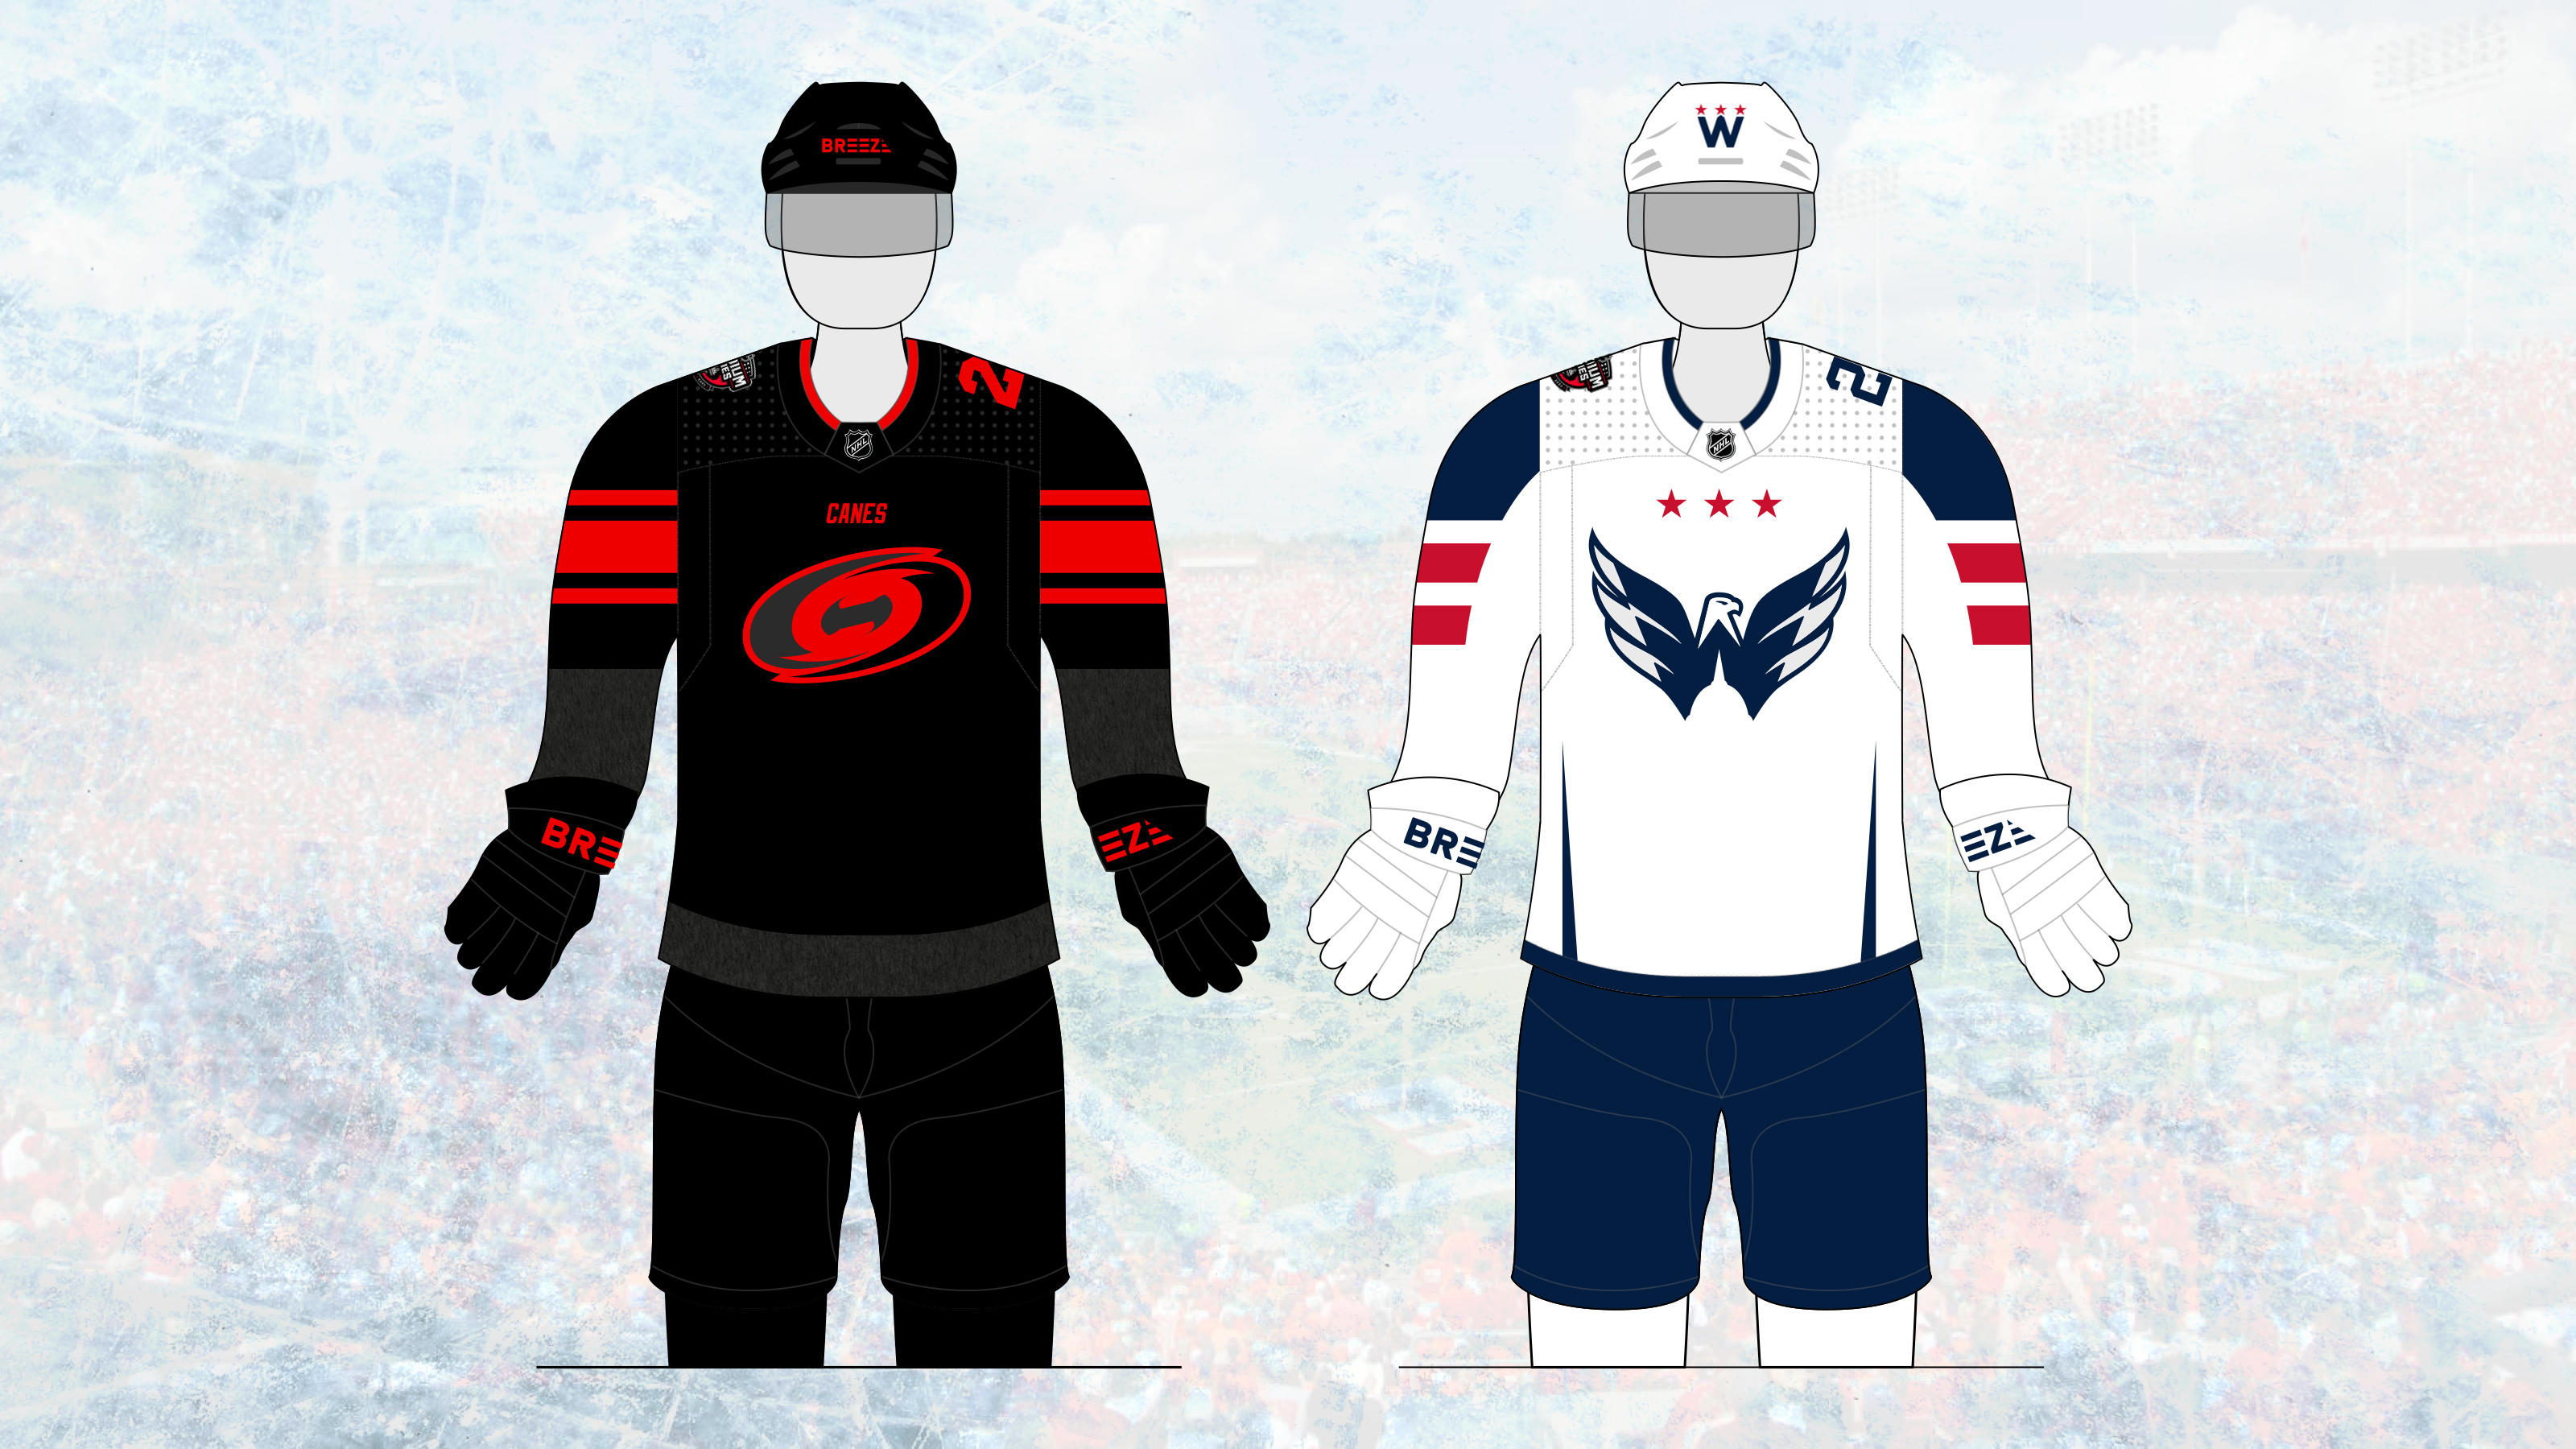 Uniform Concepts I did for the Stadium Series between the